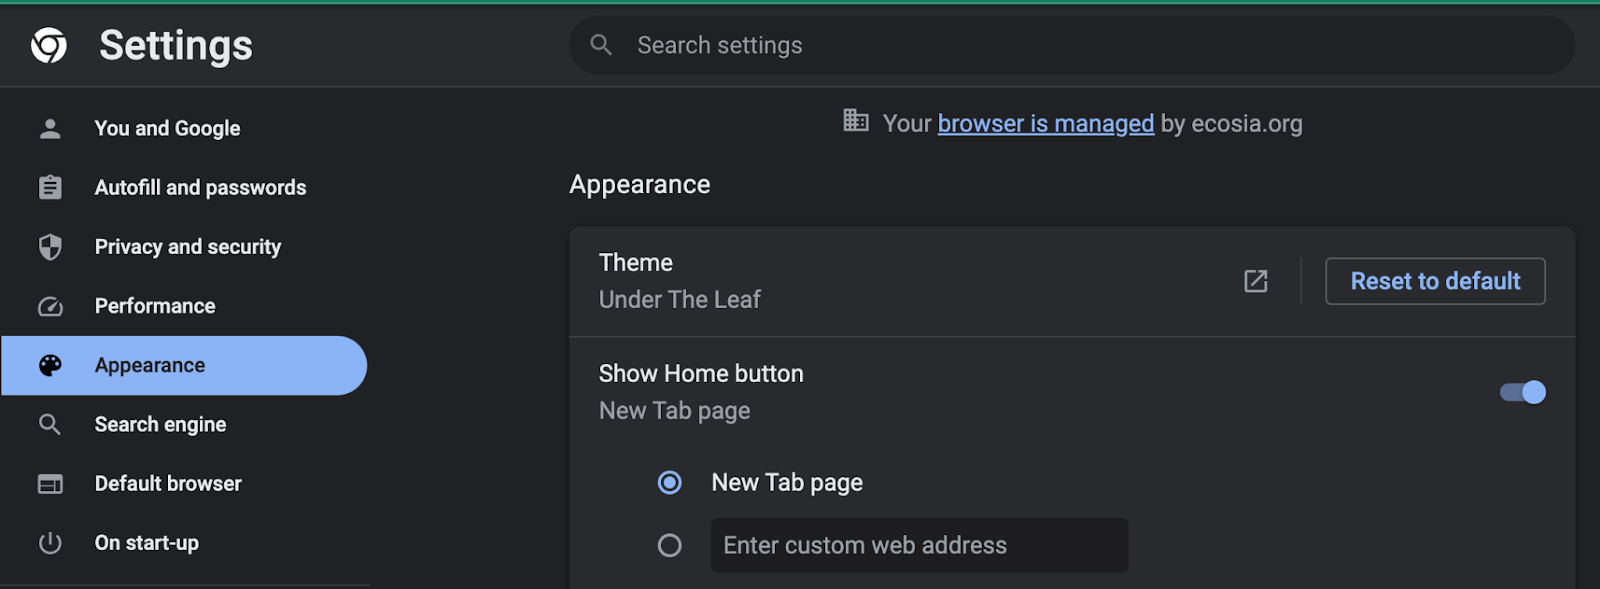 How to change the new tab page on Chrome - Ecosia Help Center